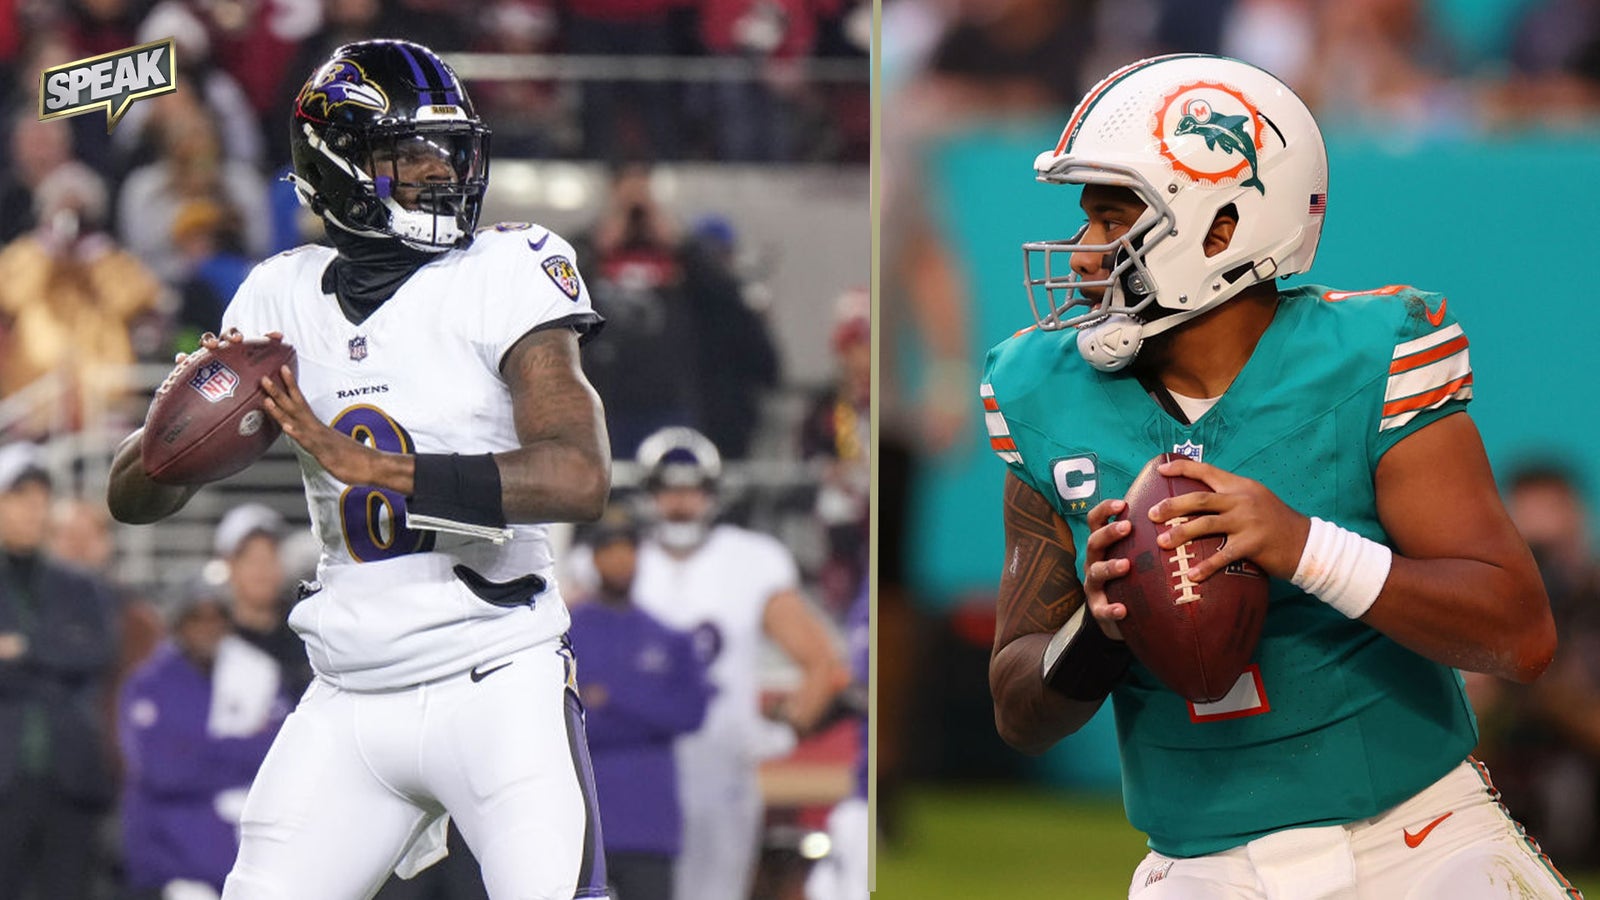 Does Lamar Jackson, Ravens, or Tua, Dolphins have the edge in Week 17?